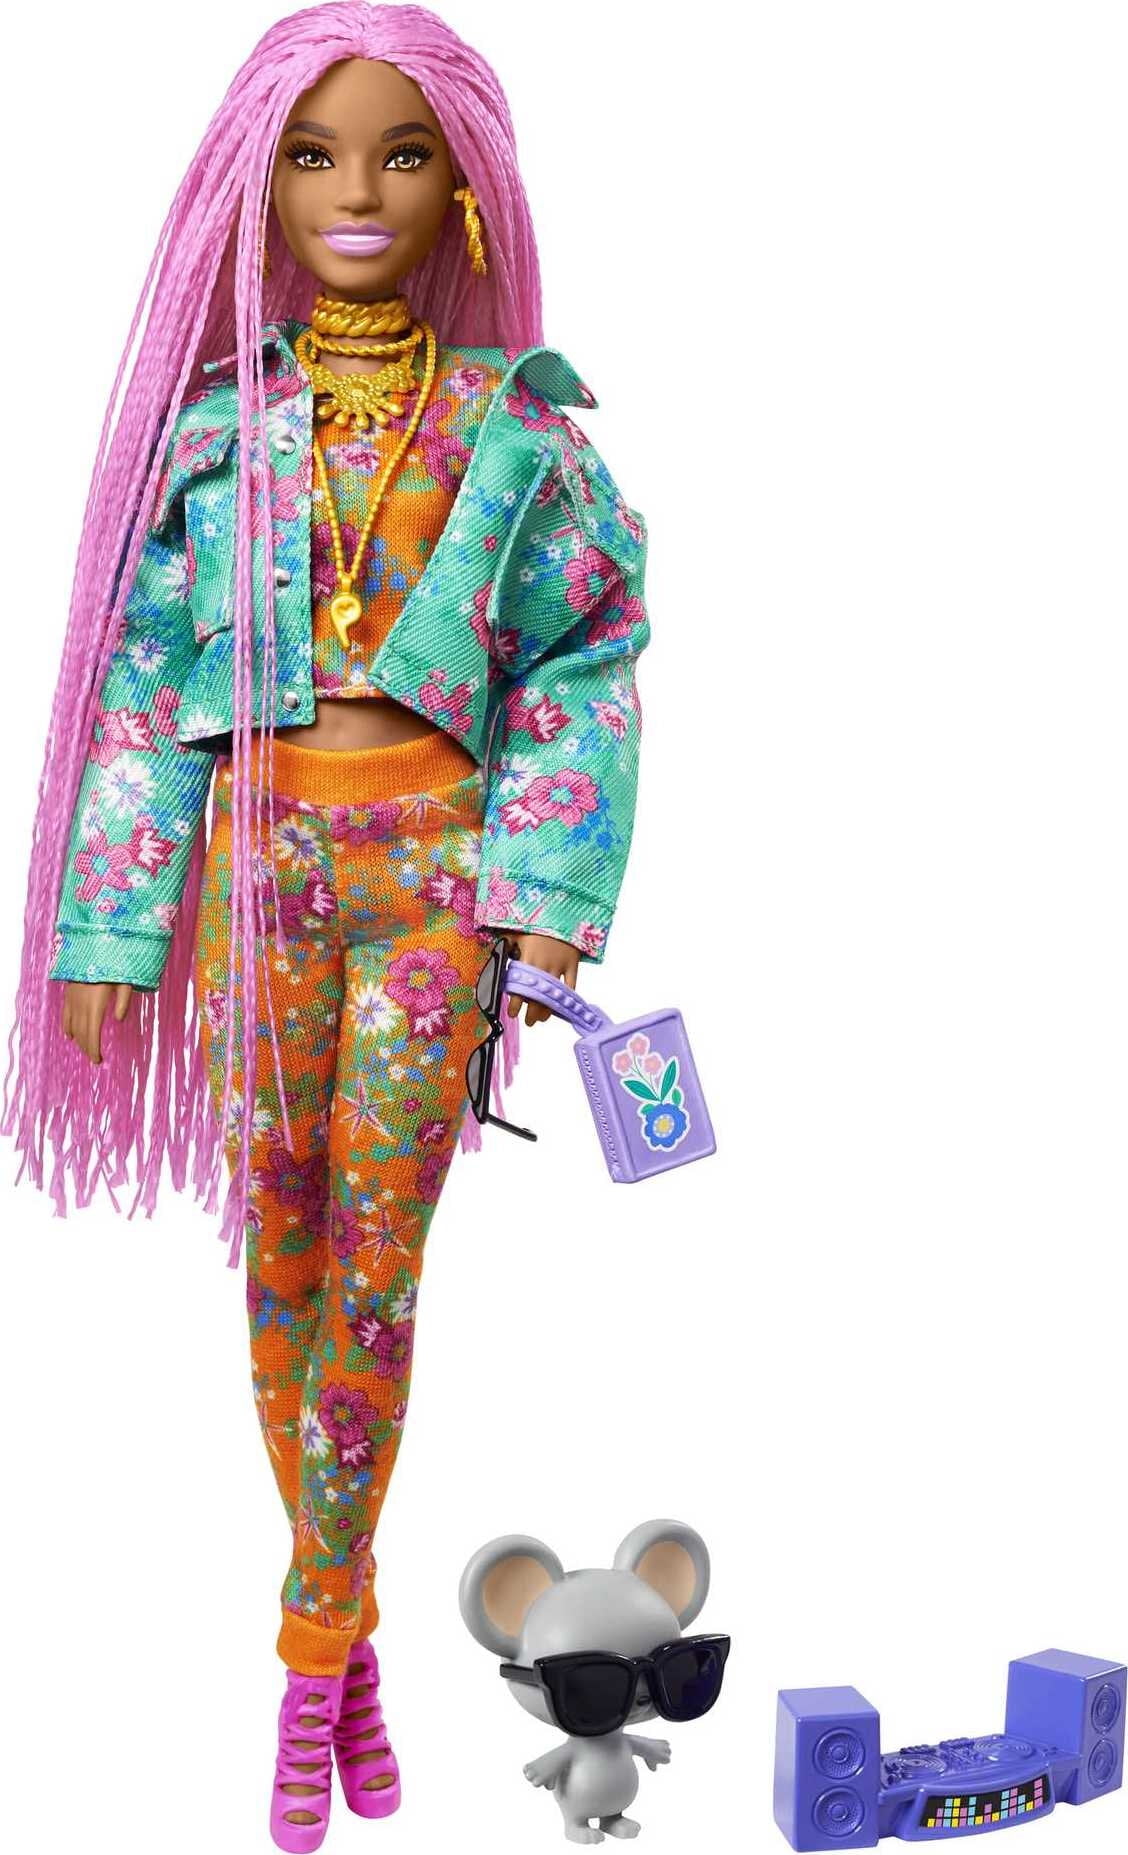 Barbie Extra Fashion Doll with Long Pink Braids in Teal Floral